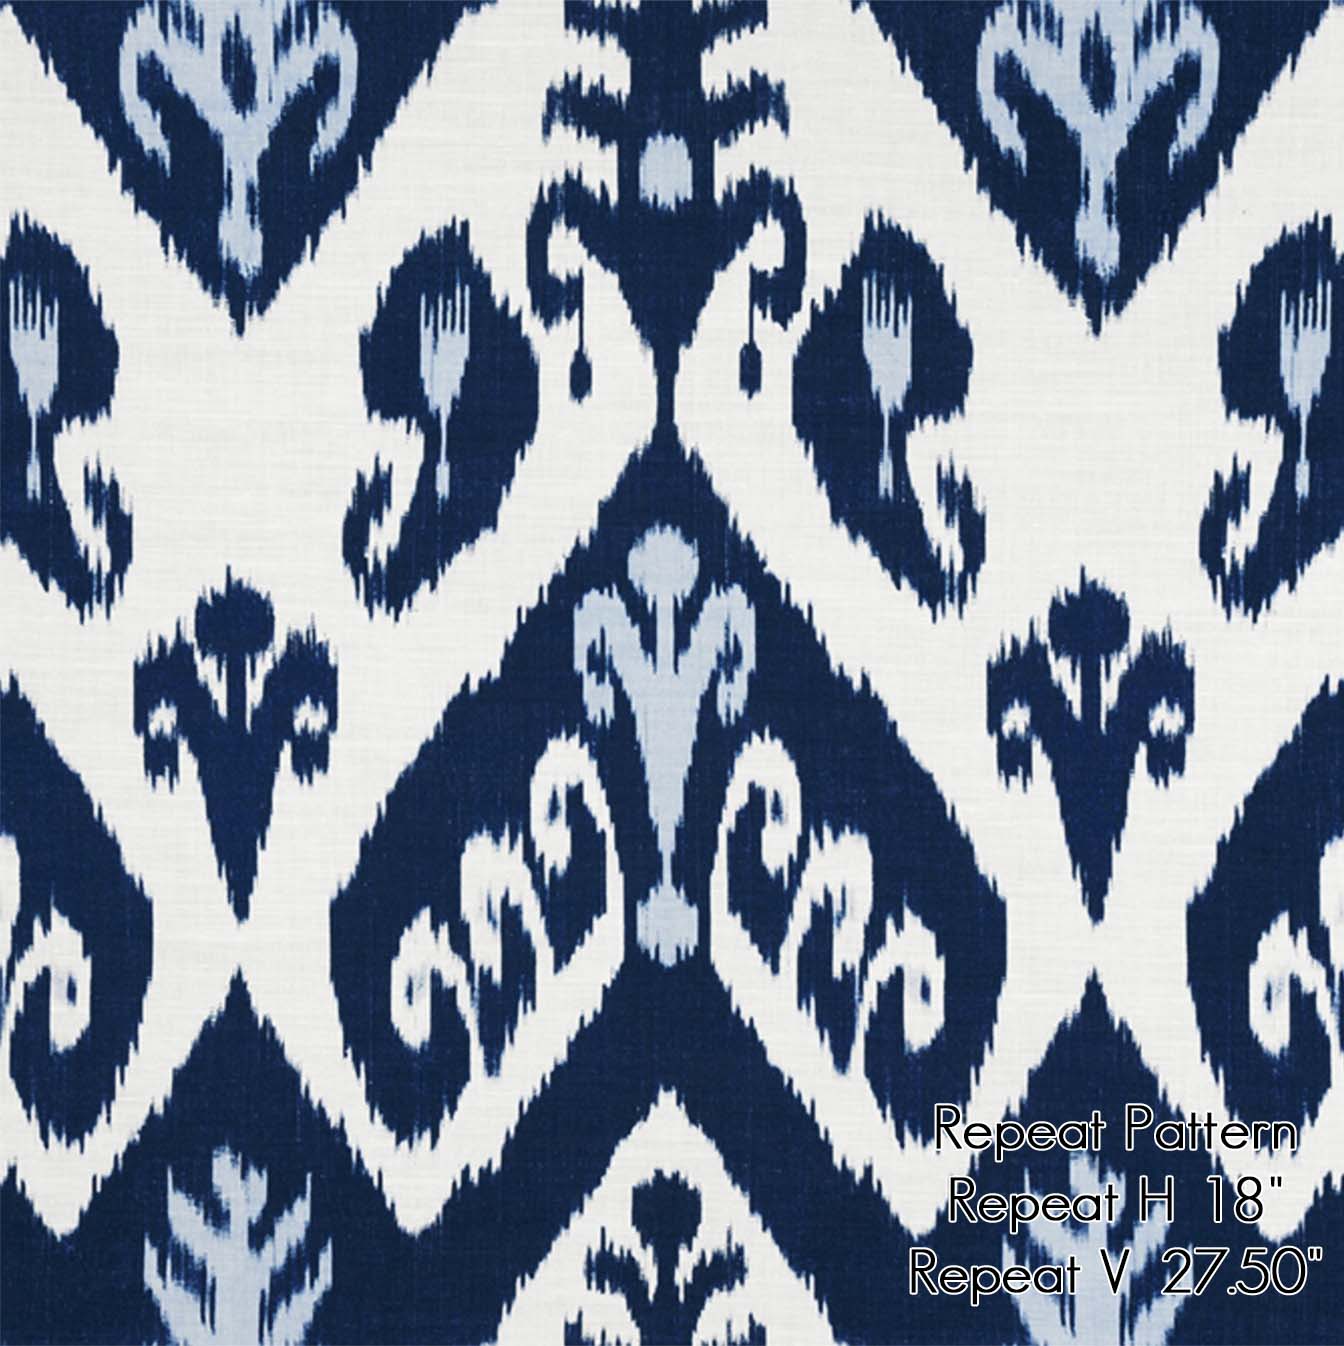 Thibaut Indies Ikat Navy Large Scale Bold Graphic Designer Decorative Throw Pillow Cover Pattern Repeat